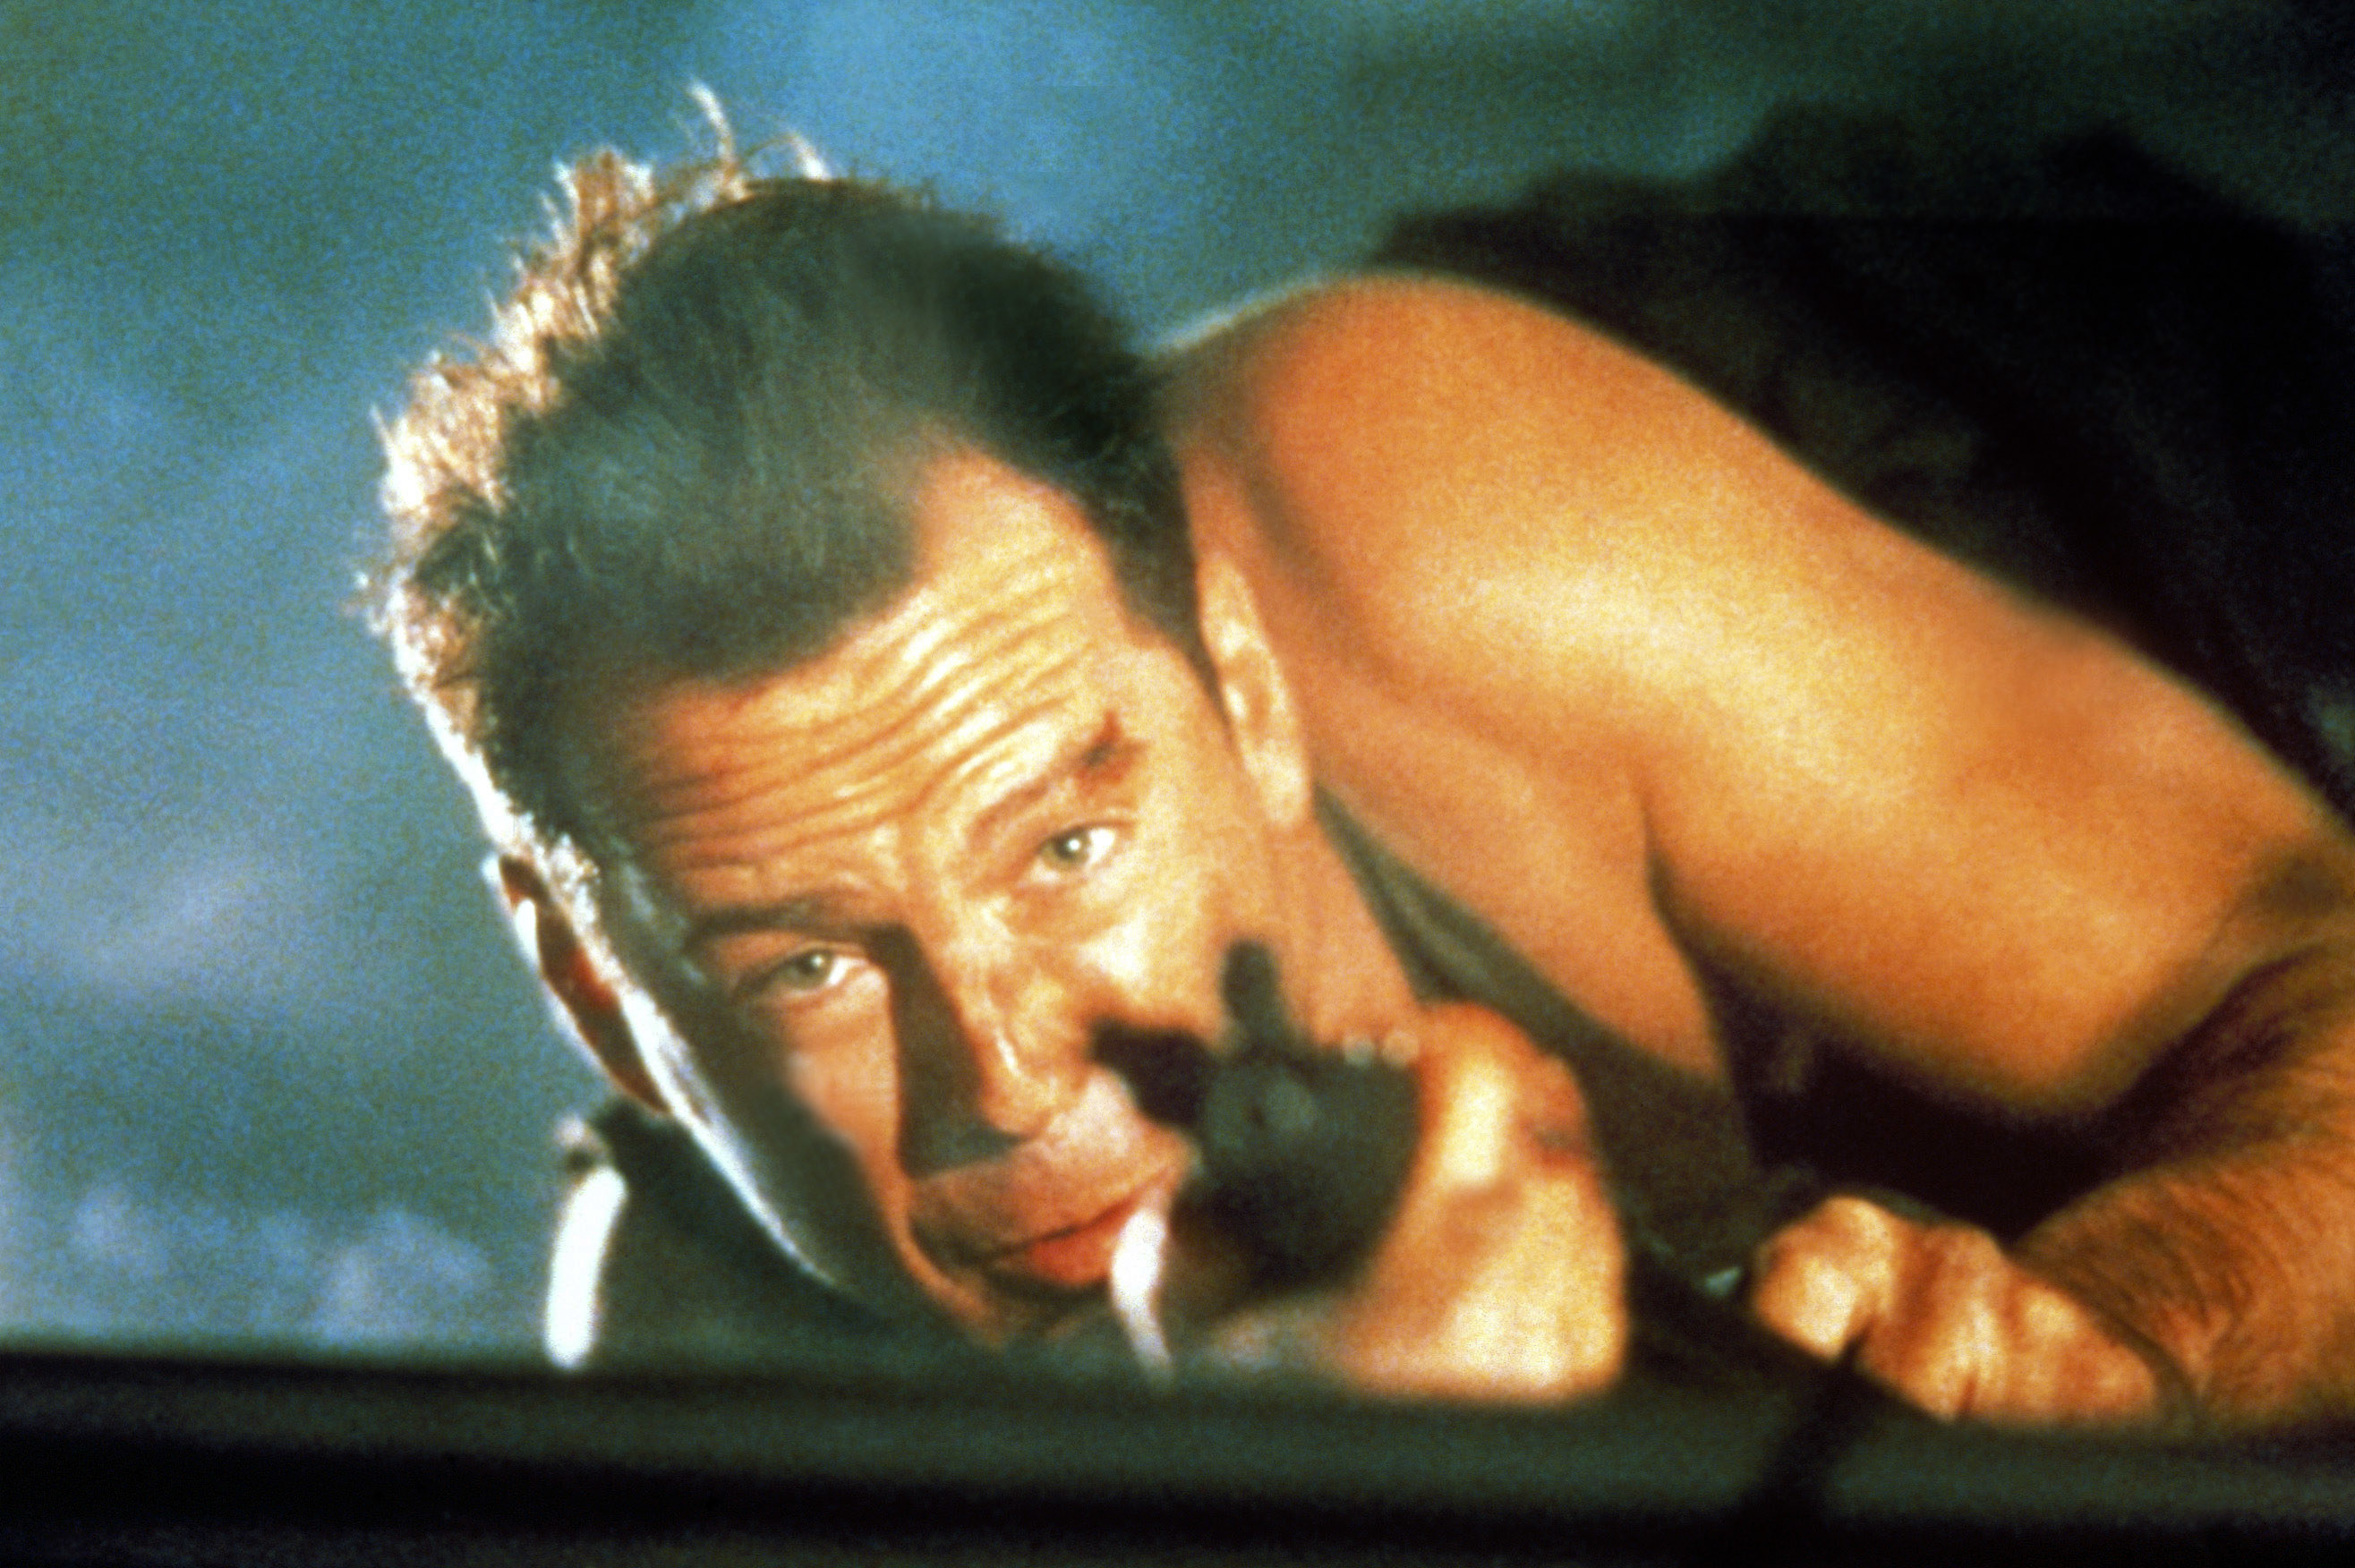 Bruce as McClane holding a weapon